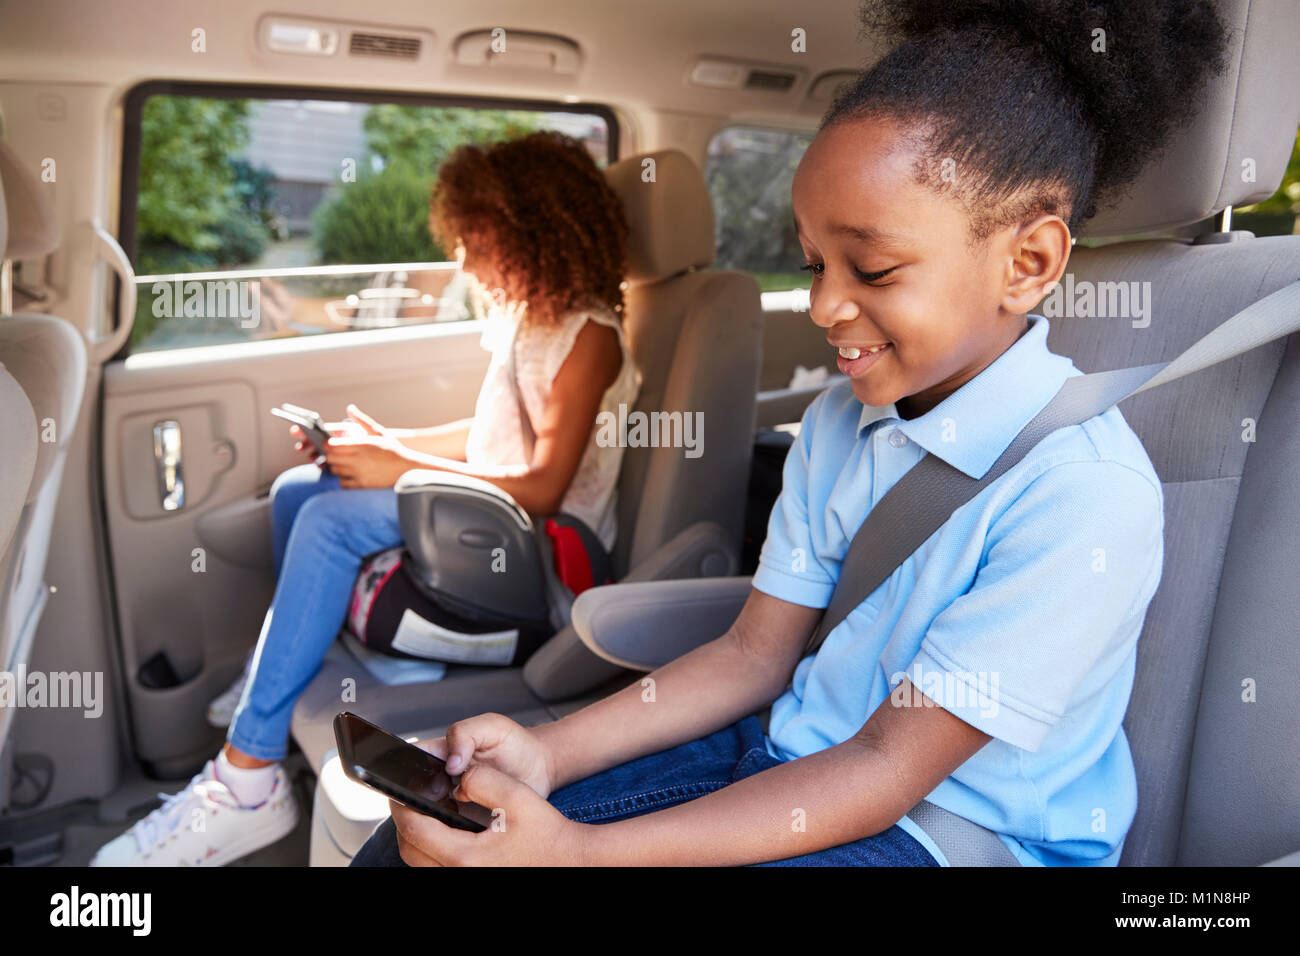 Children Using Digital Devices On Car Journey Stock Photo